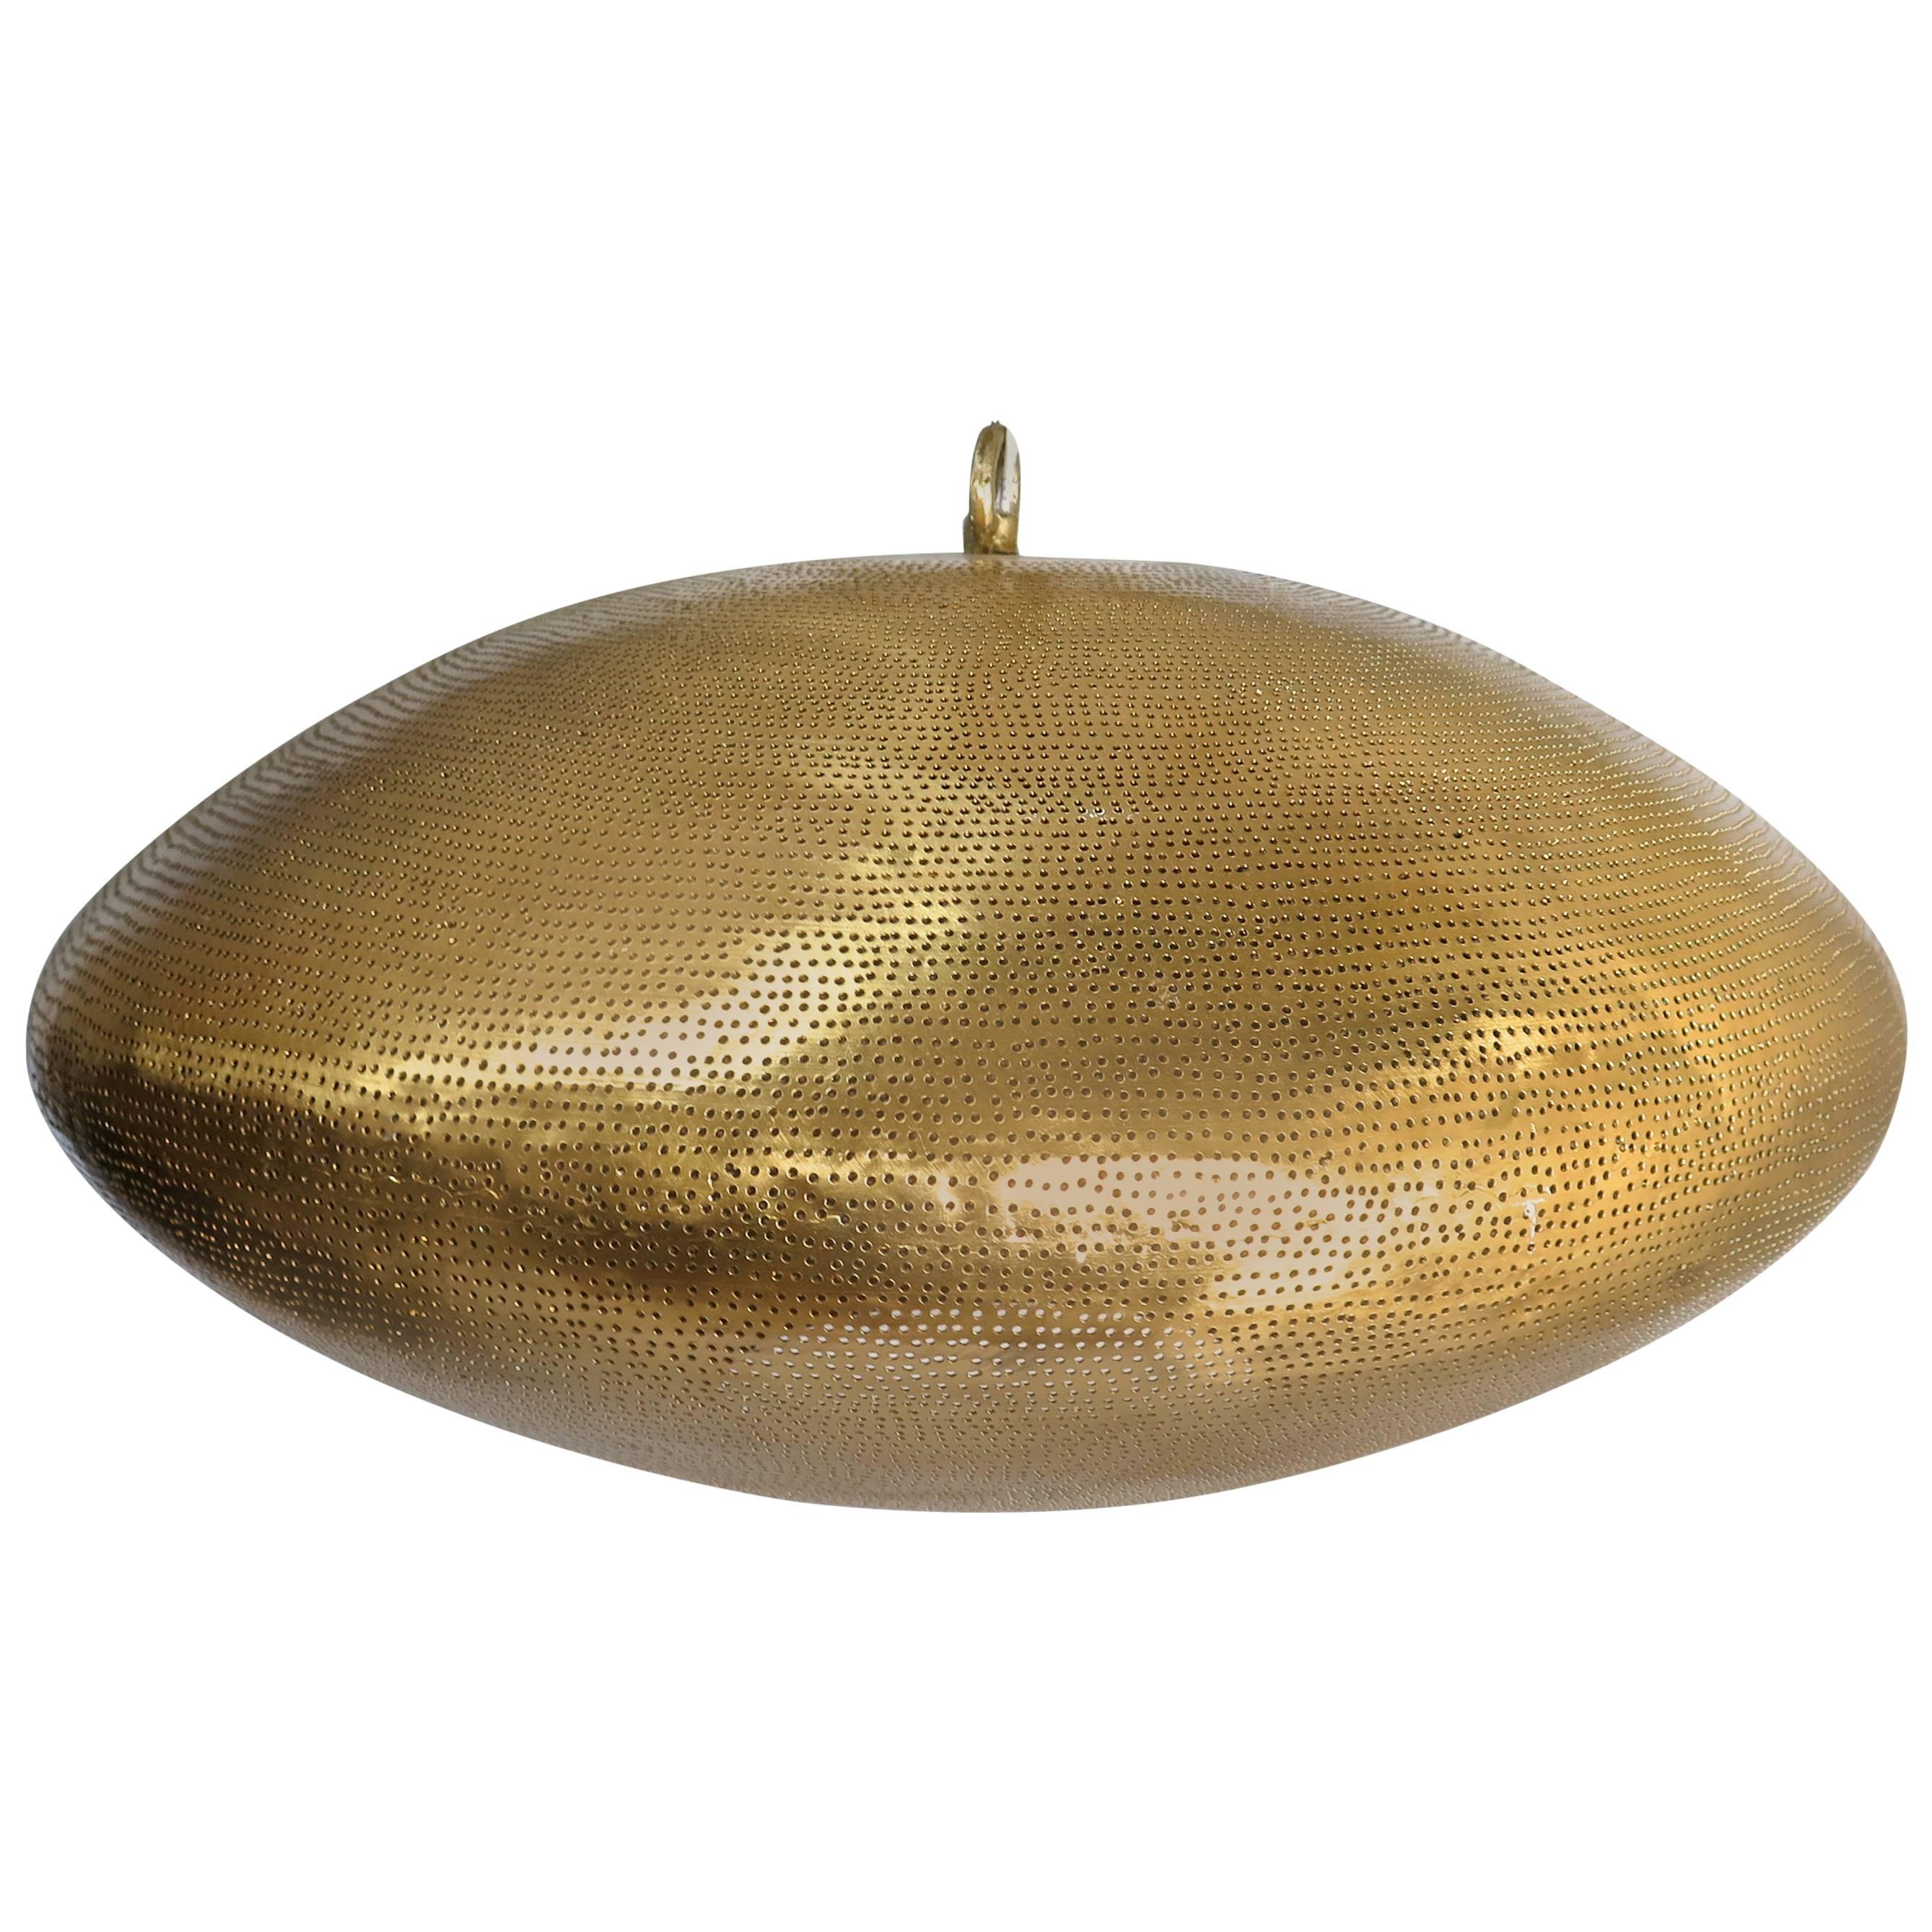 Large "Oro" Pendant Brass with Pierced Holes Haskell Design For Sale